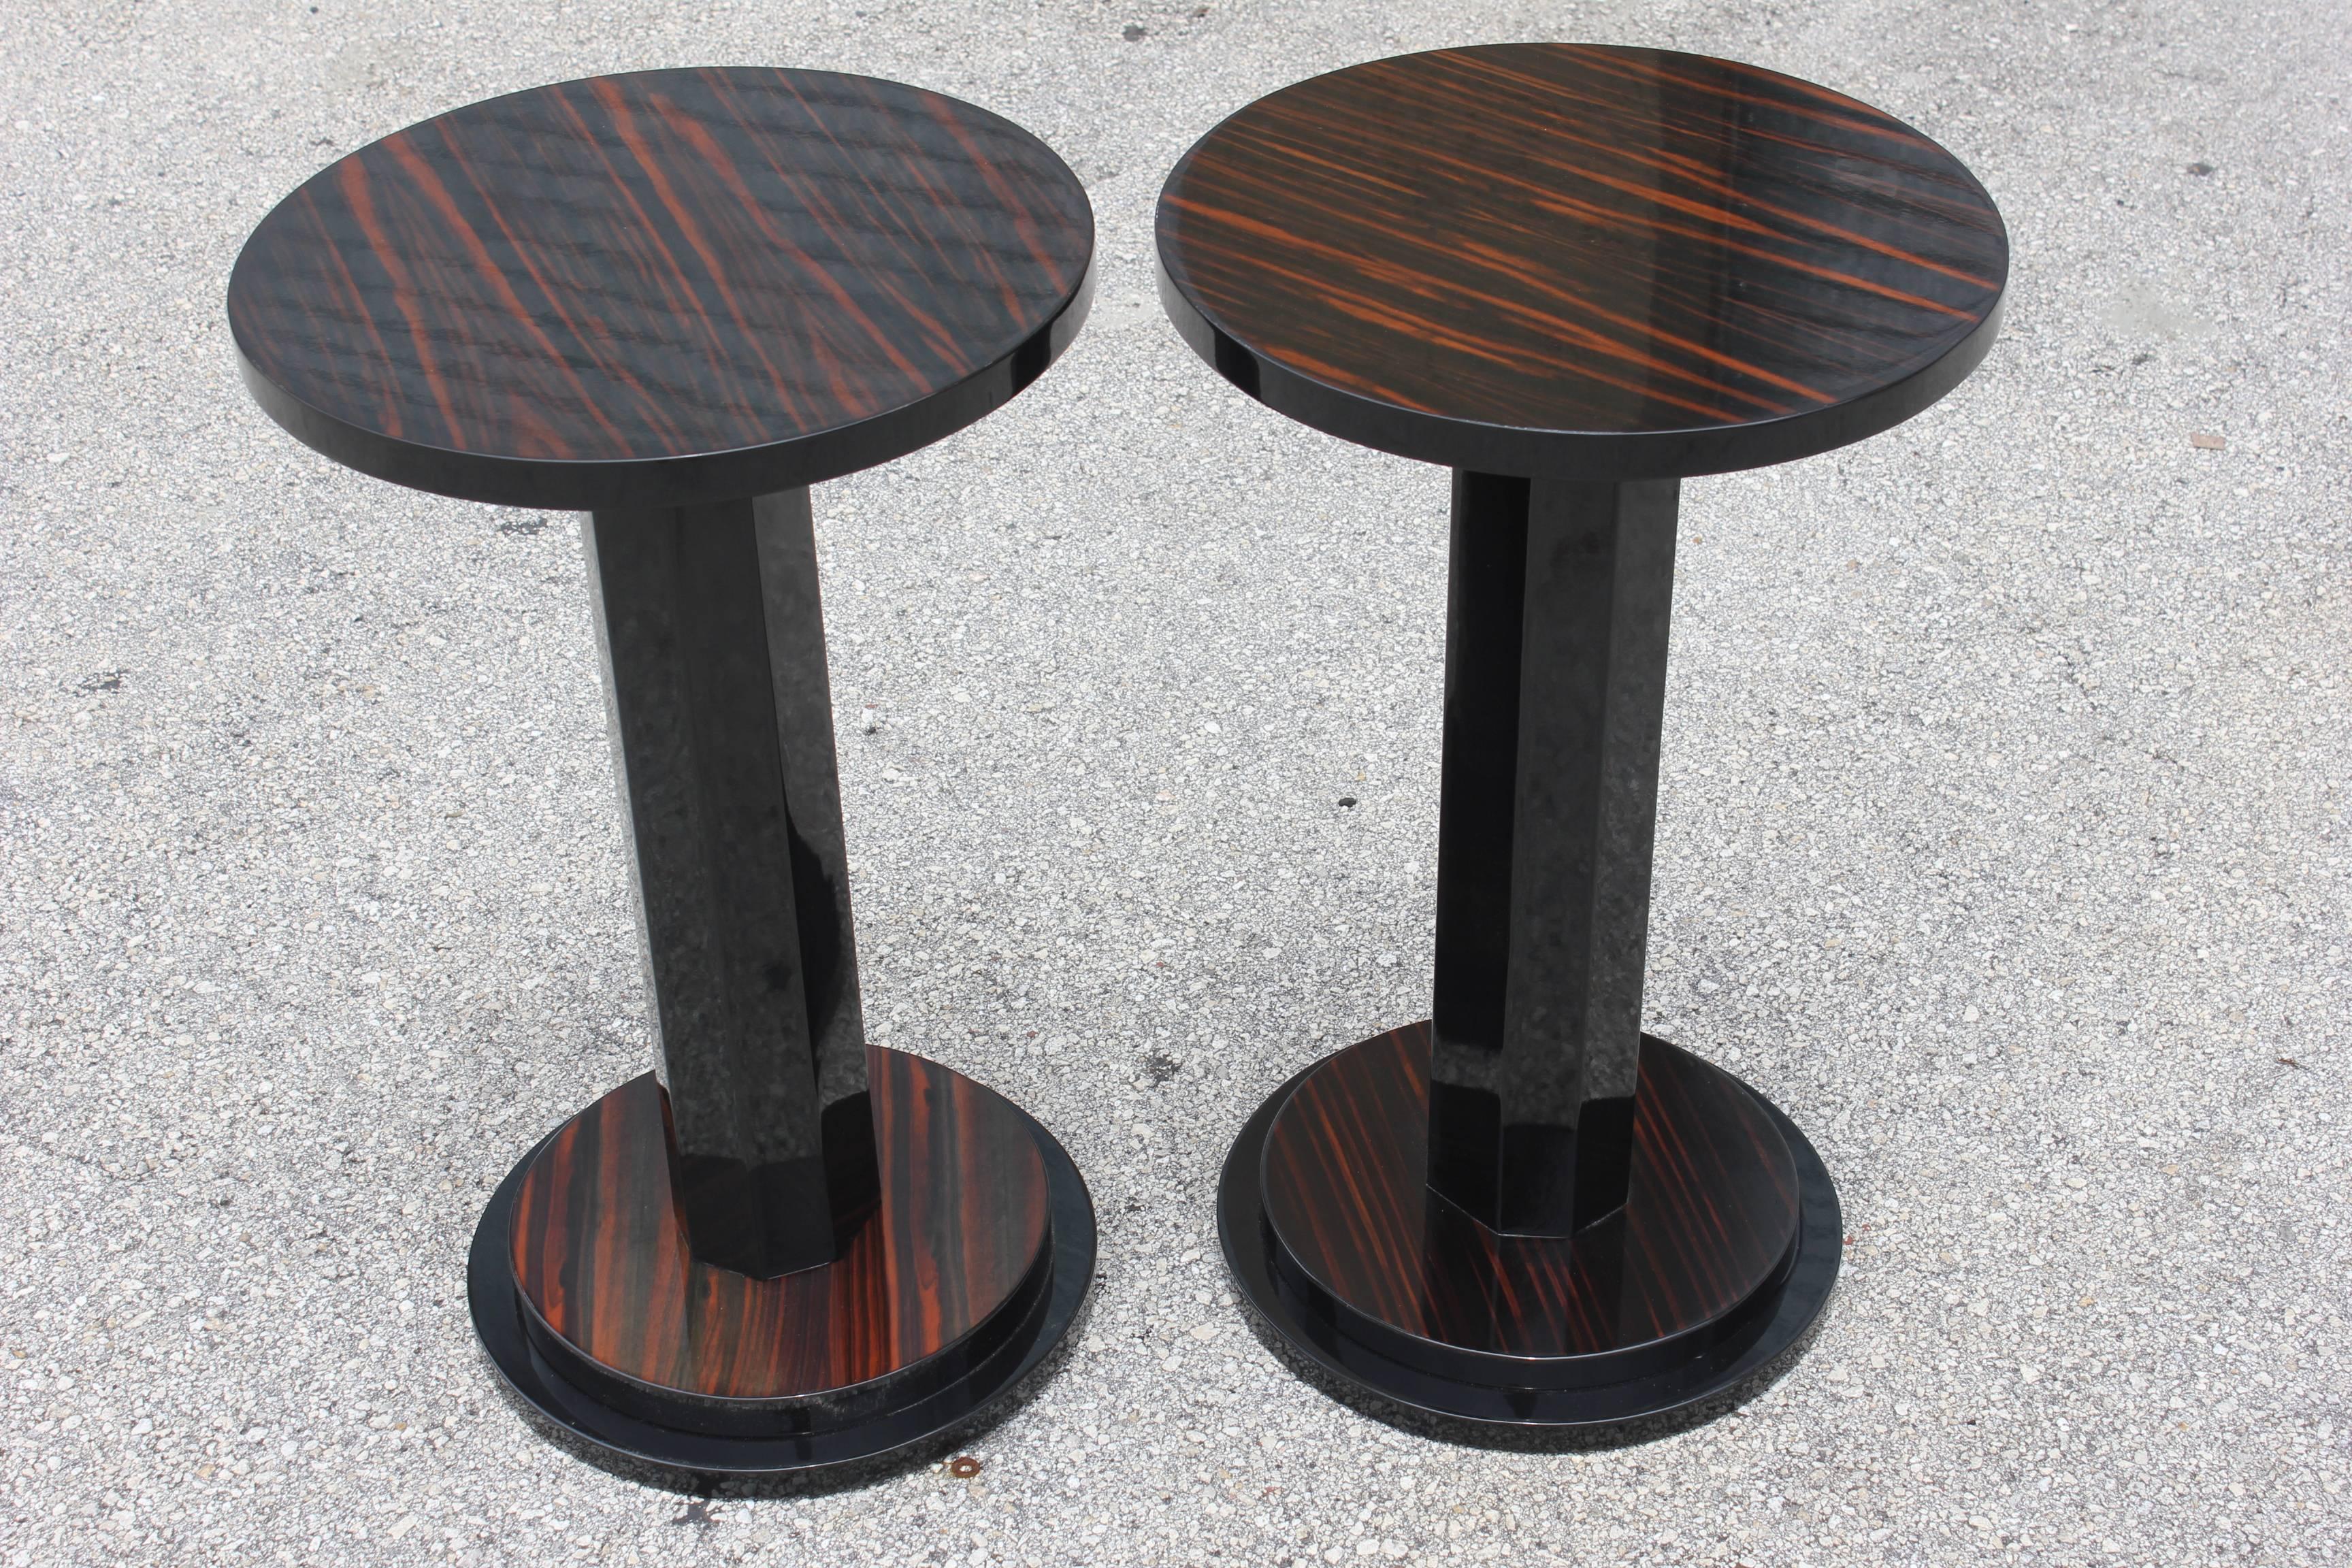 A pair of French Art Deco exotic Macassar ebony end tables, circa 1940s. Black lacquer center column and black lacquer two-tiered base. We acquired five pairs of these tables from the lounge of a French Hotel. There are slight variations to the